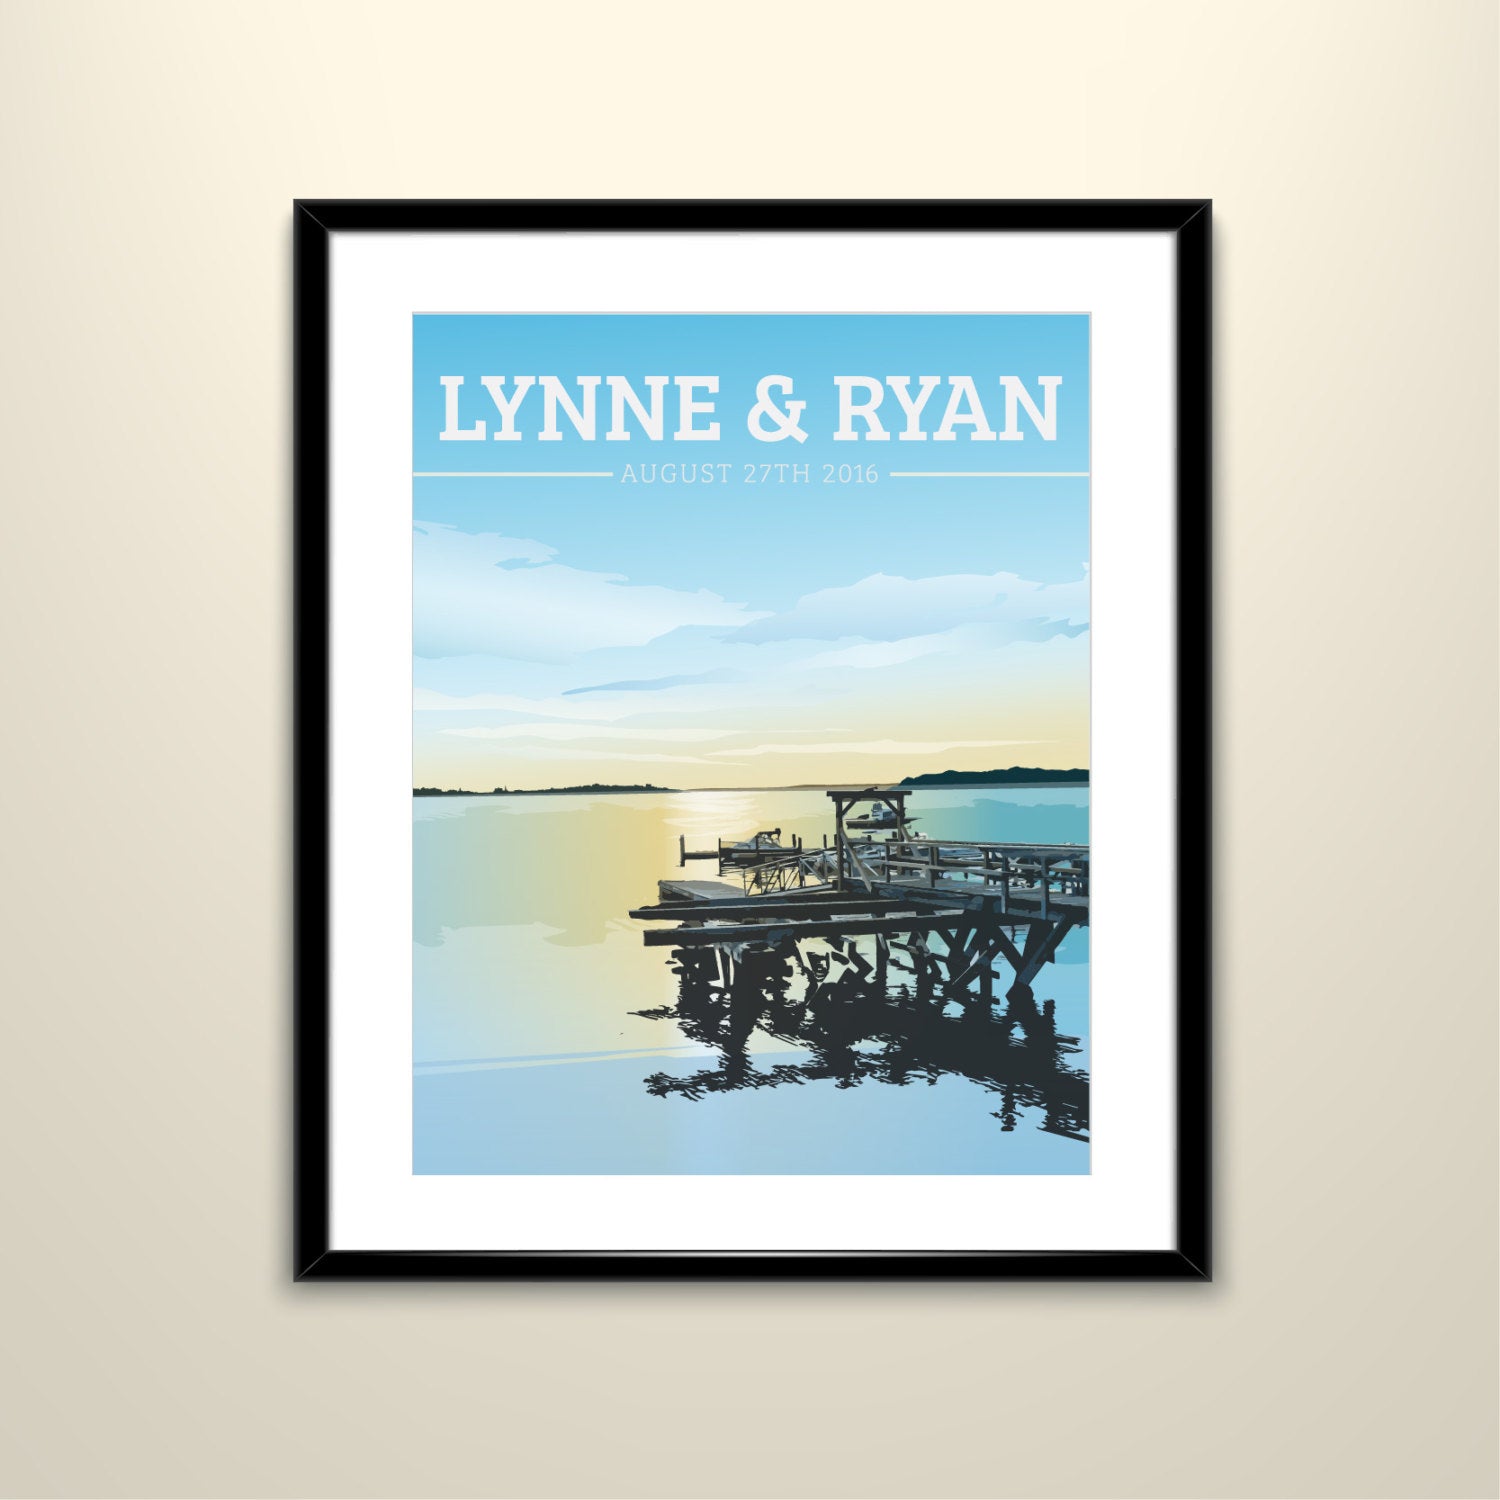 Peaks Island Maine Pier Vintage 11x14 Paper Poster - Wedding Poster personalized with Names and date (frame not included)